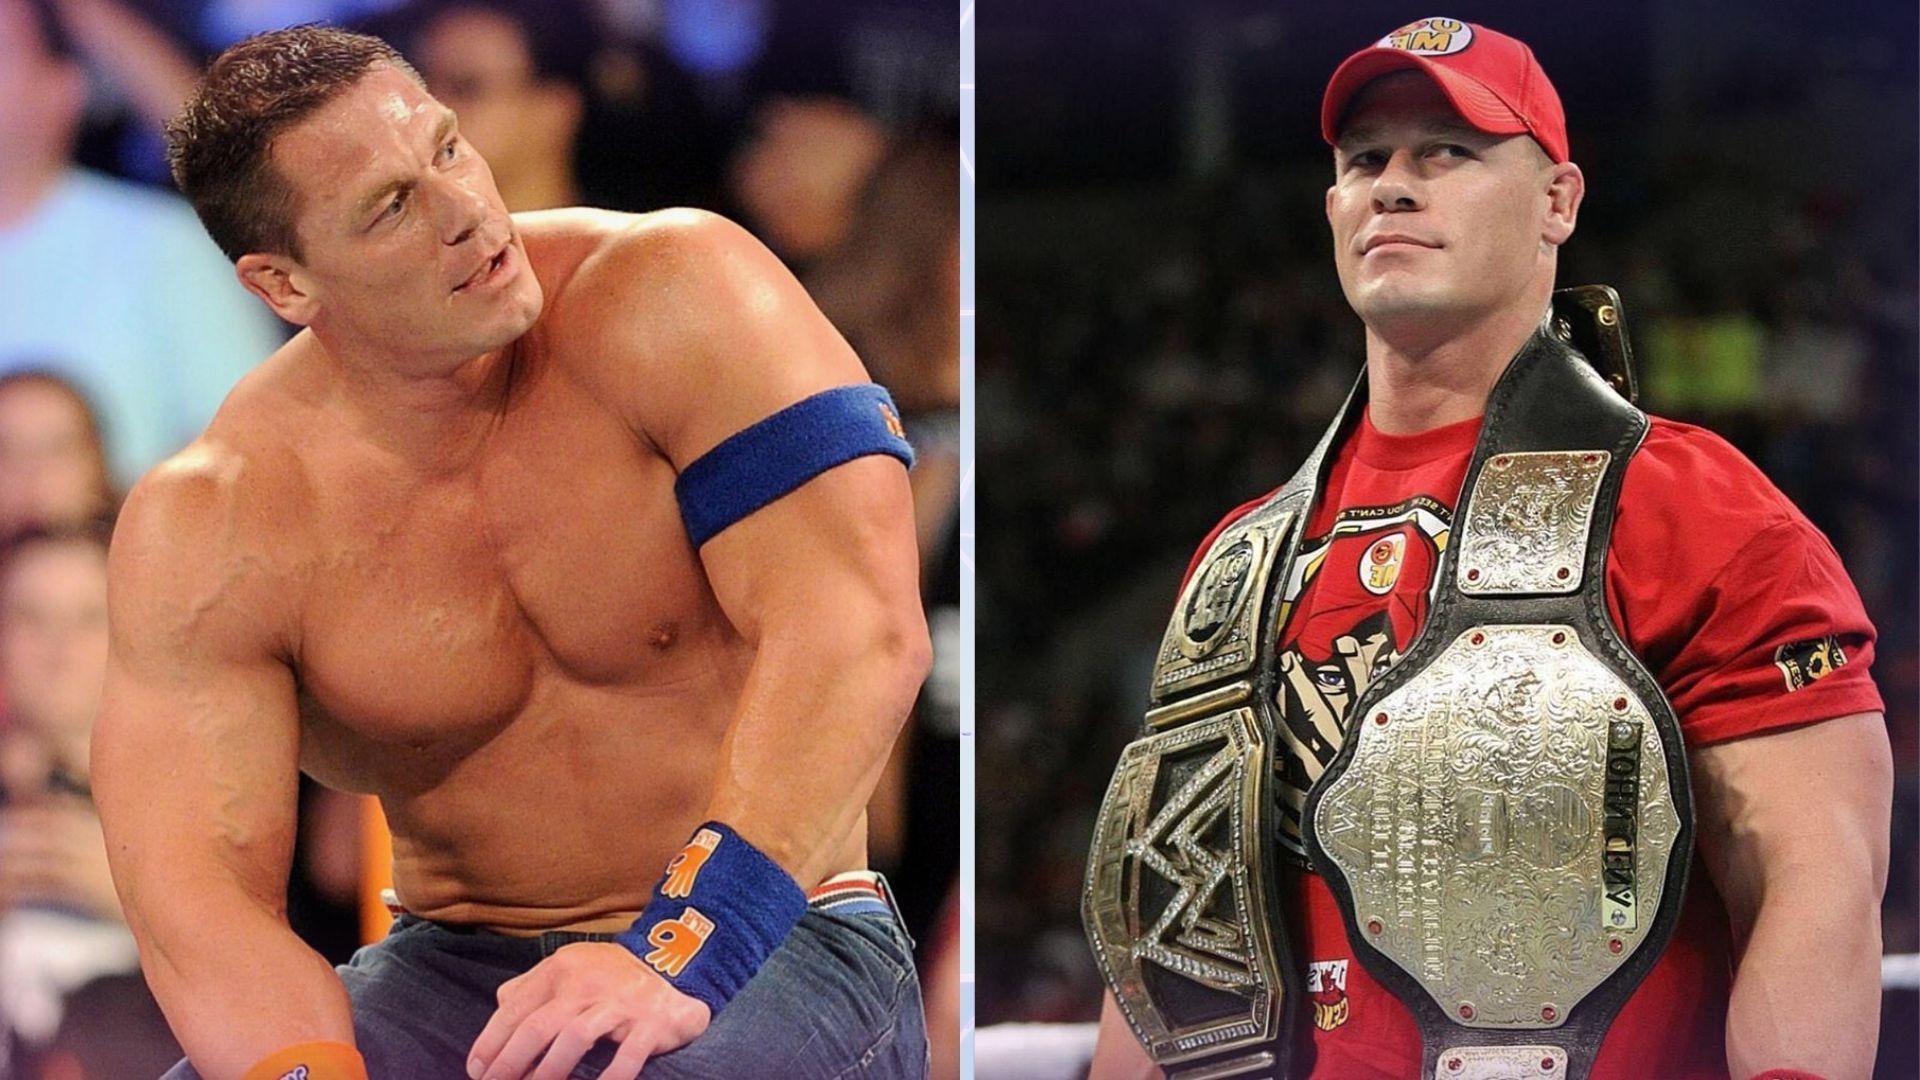 John Cena completed 20 years with WWE!